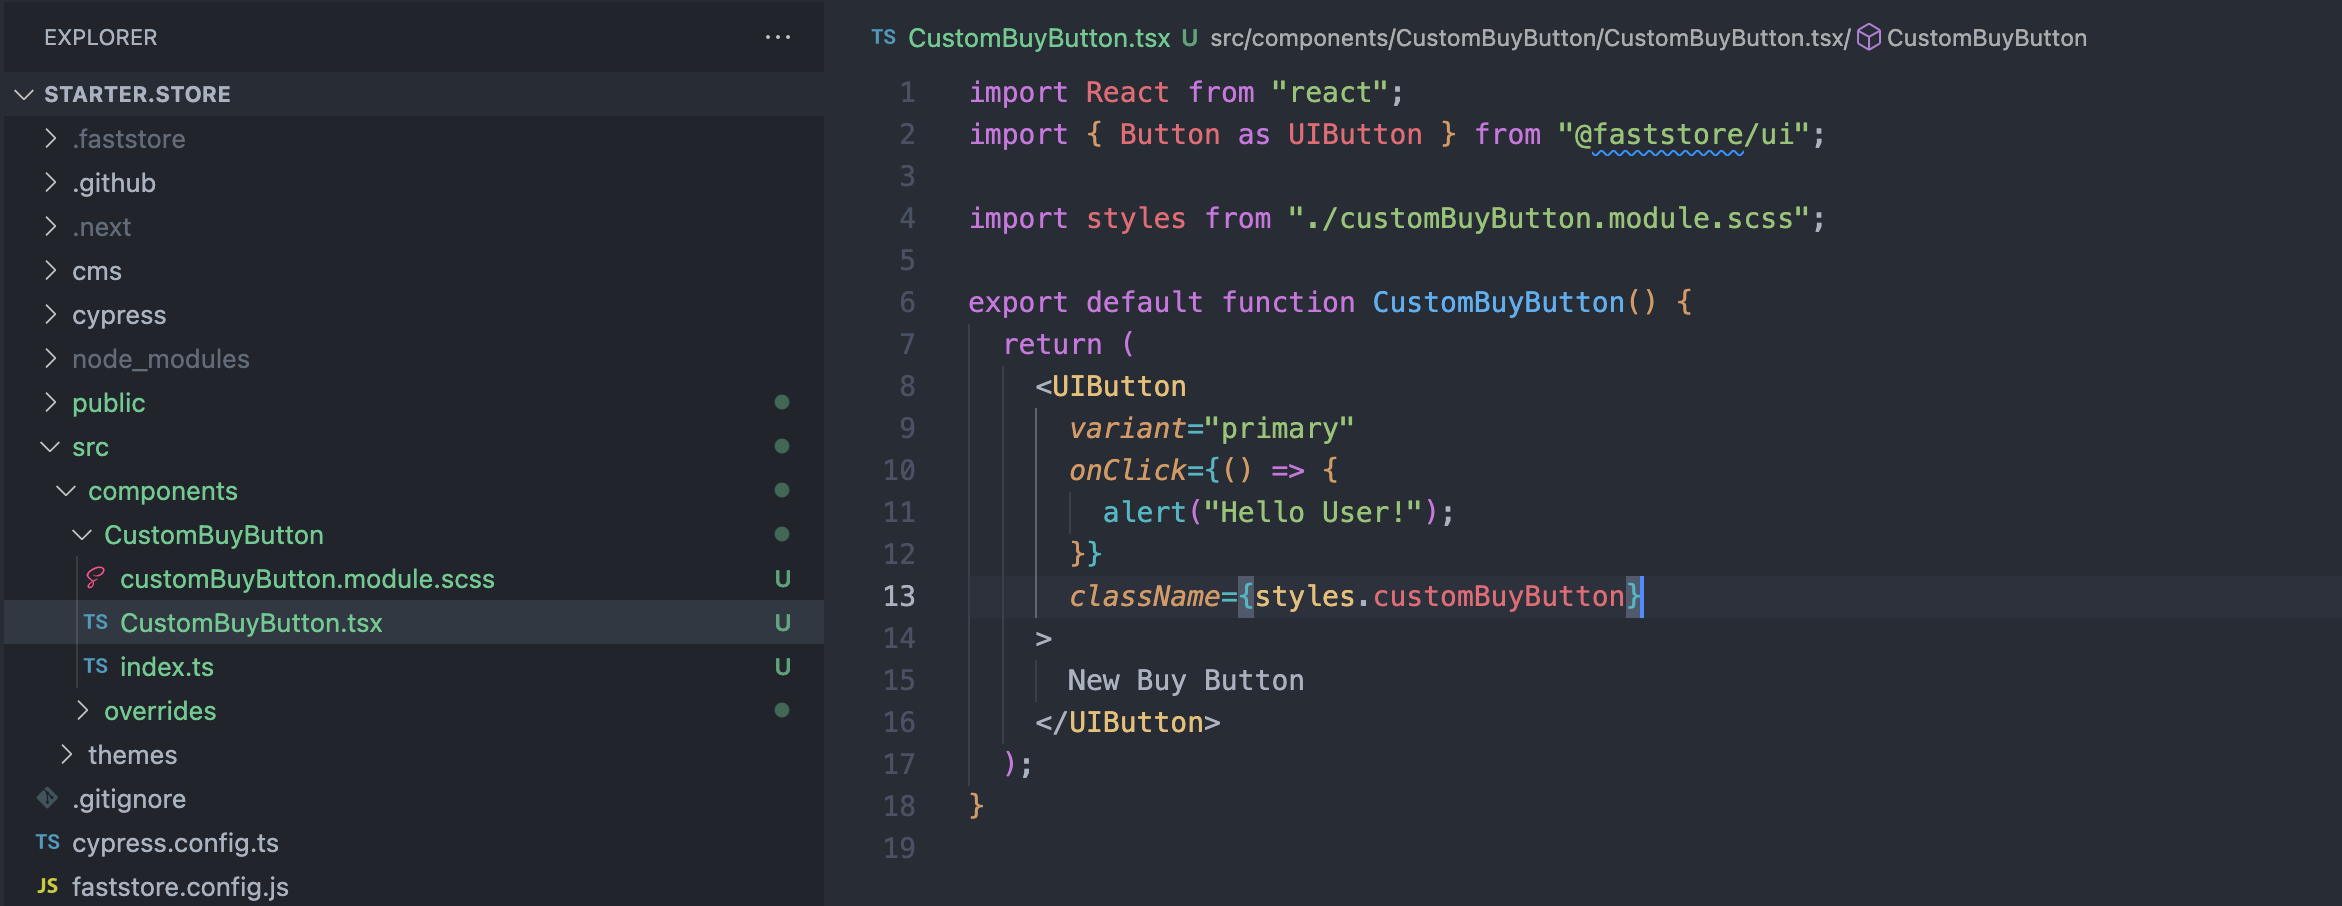 custom-buy-button-component-code